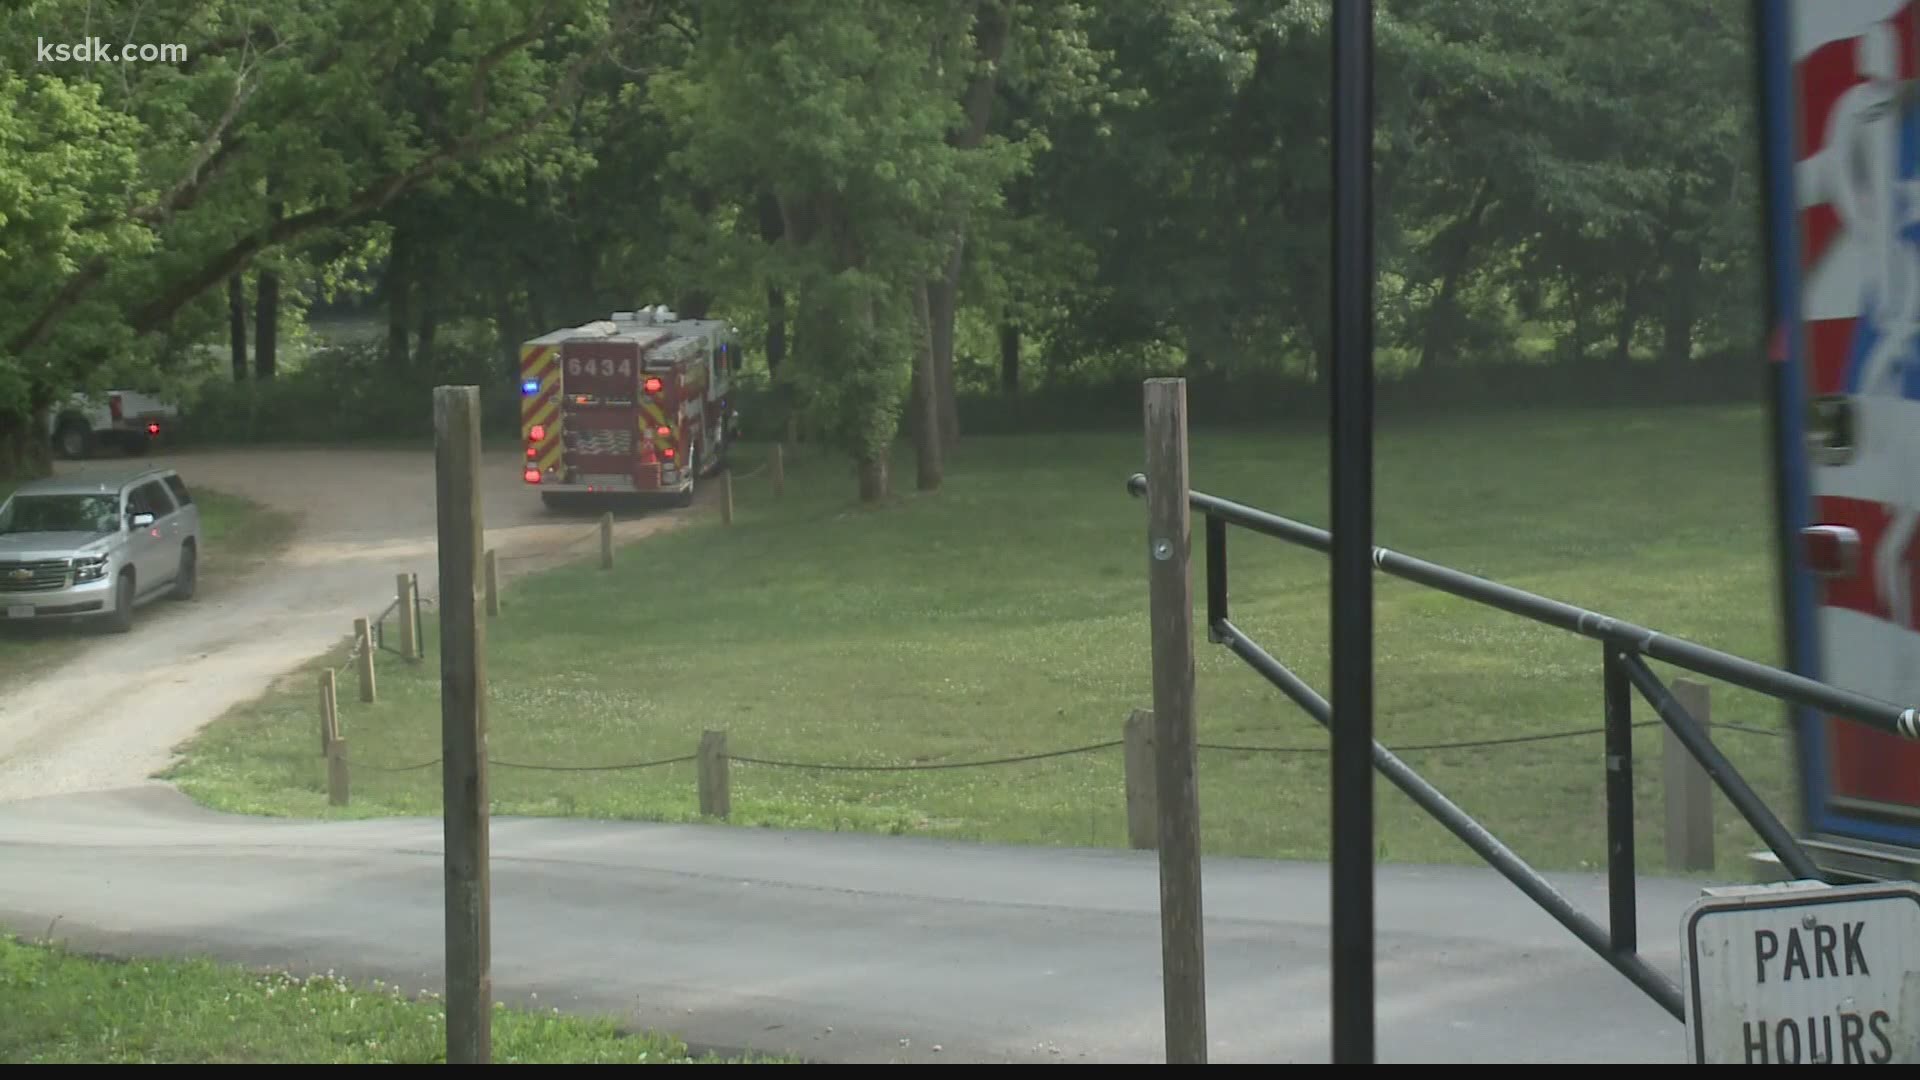 At around 5:30, first responders recovered the body of a man in his 50s who went under the water at around 3:30 and didn't resurface